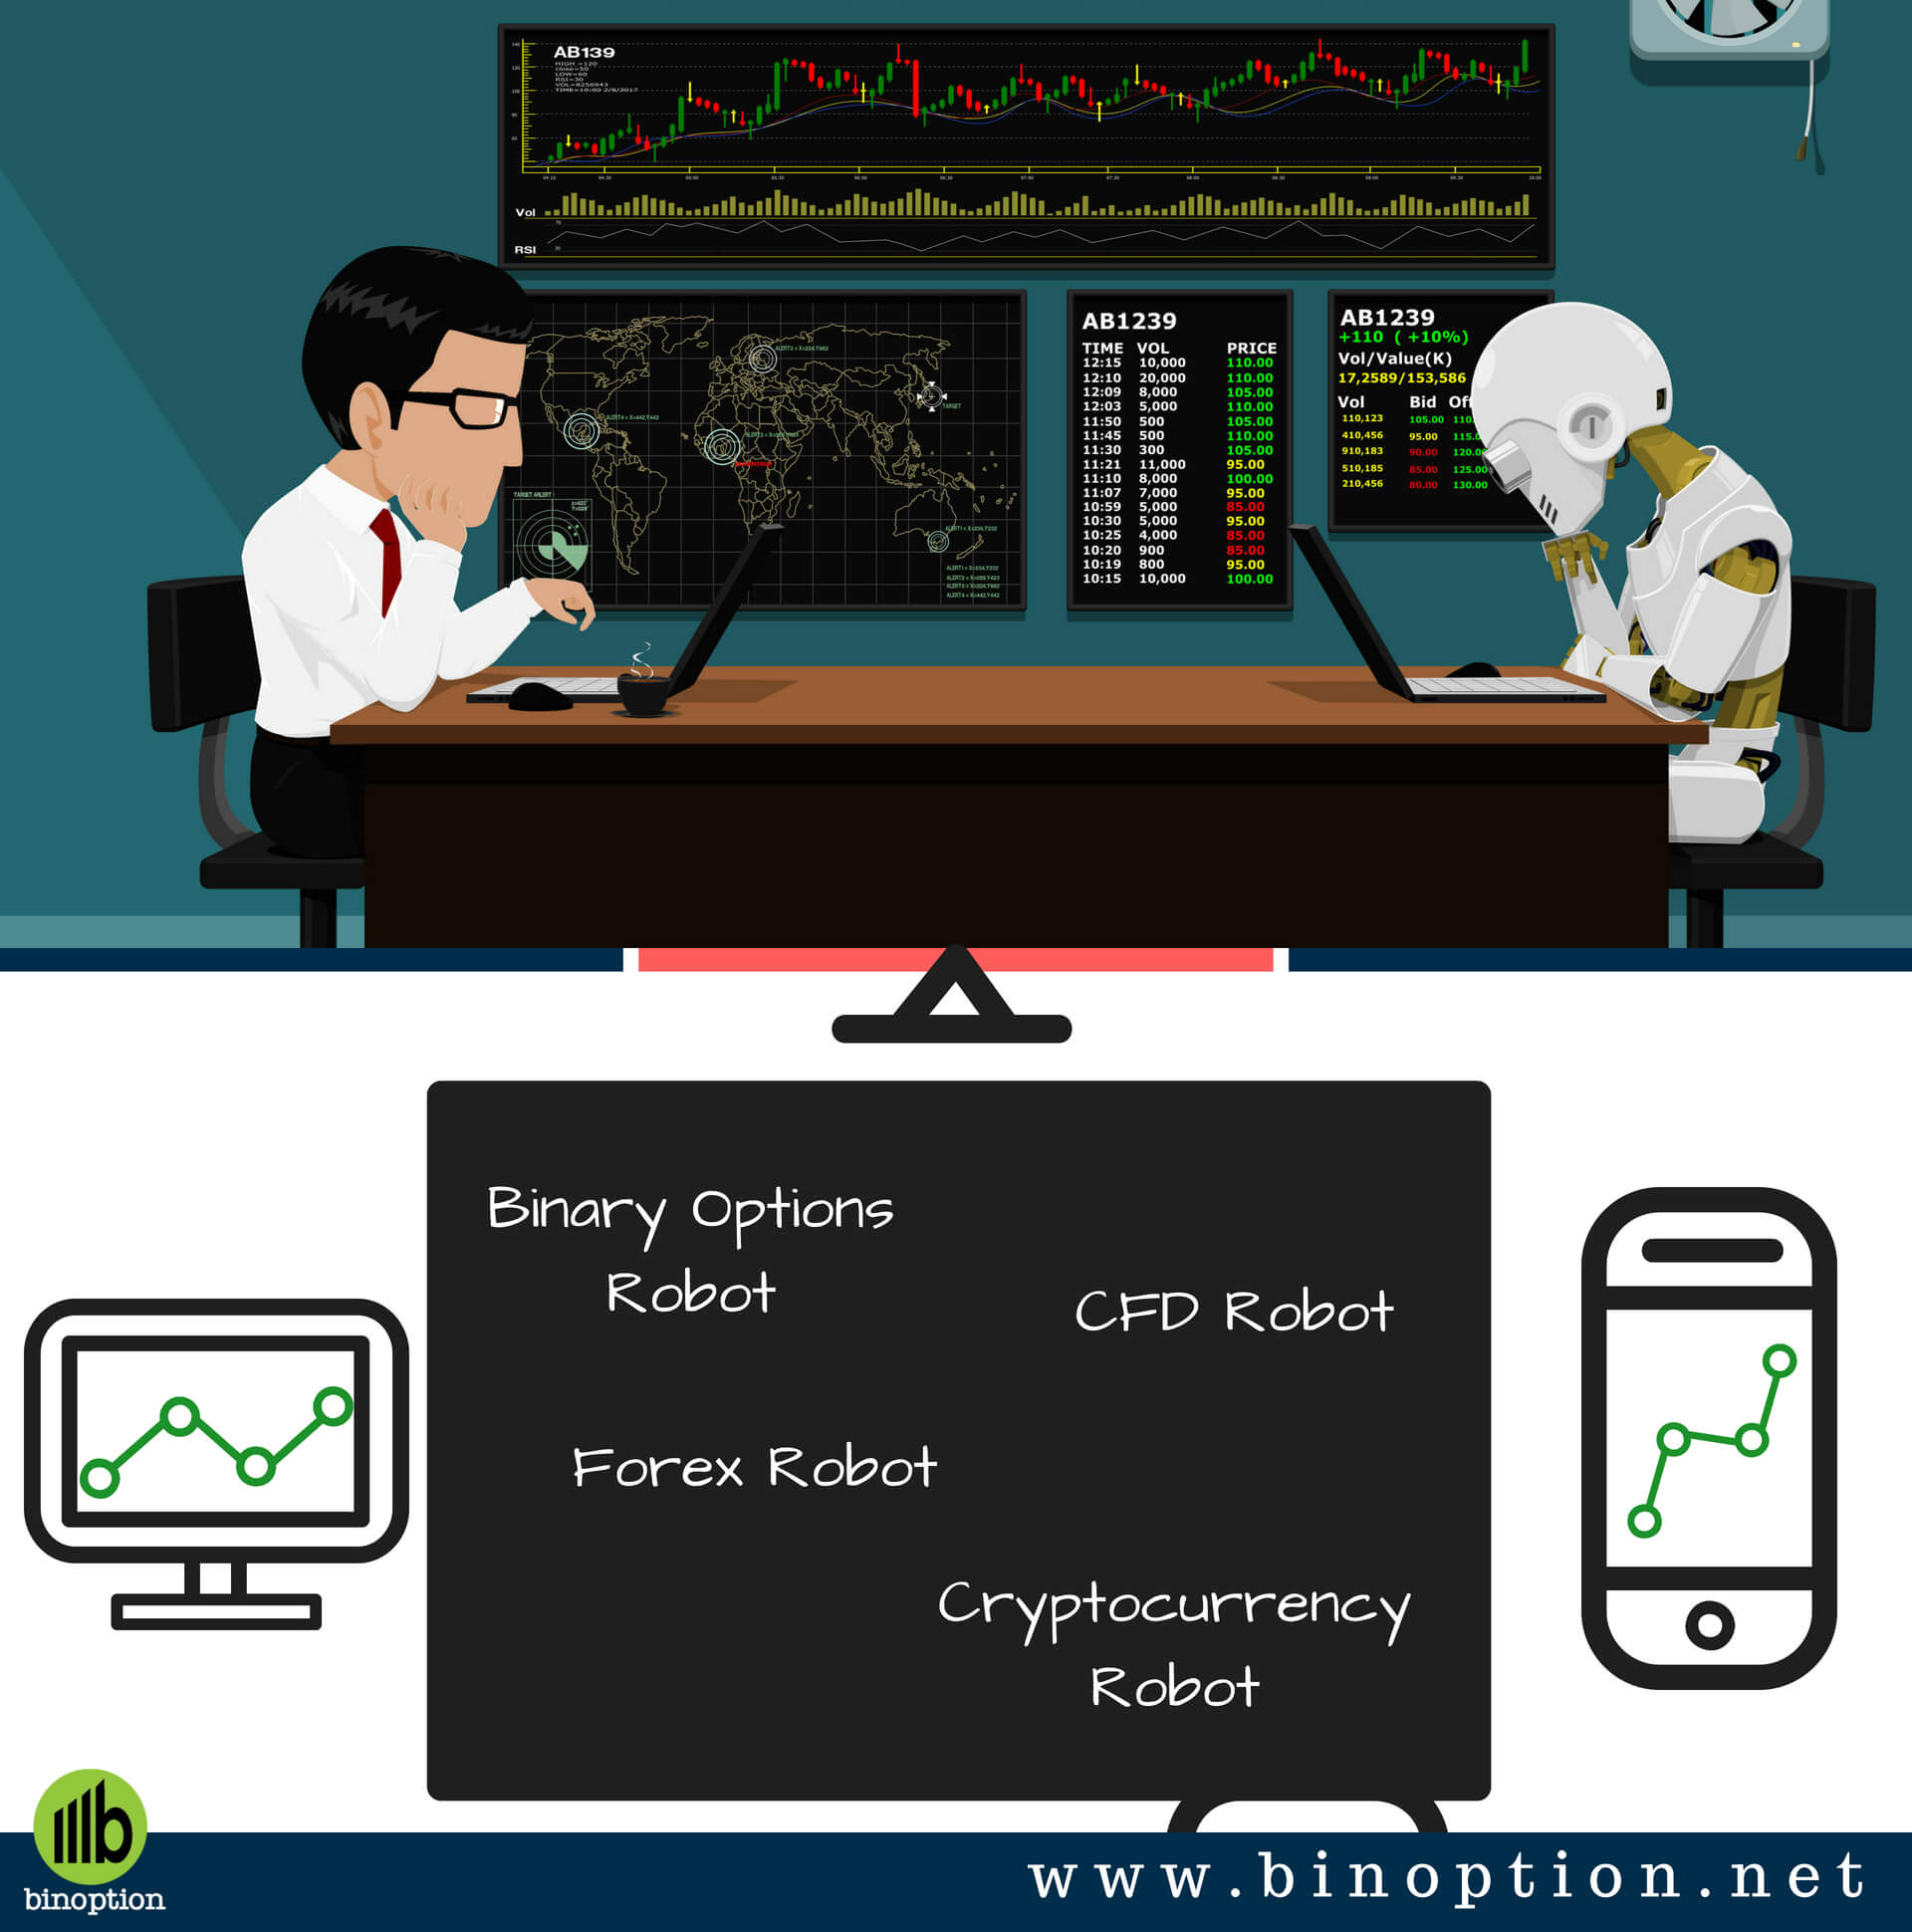 Auto binary options trading software review